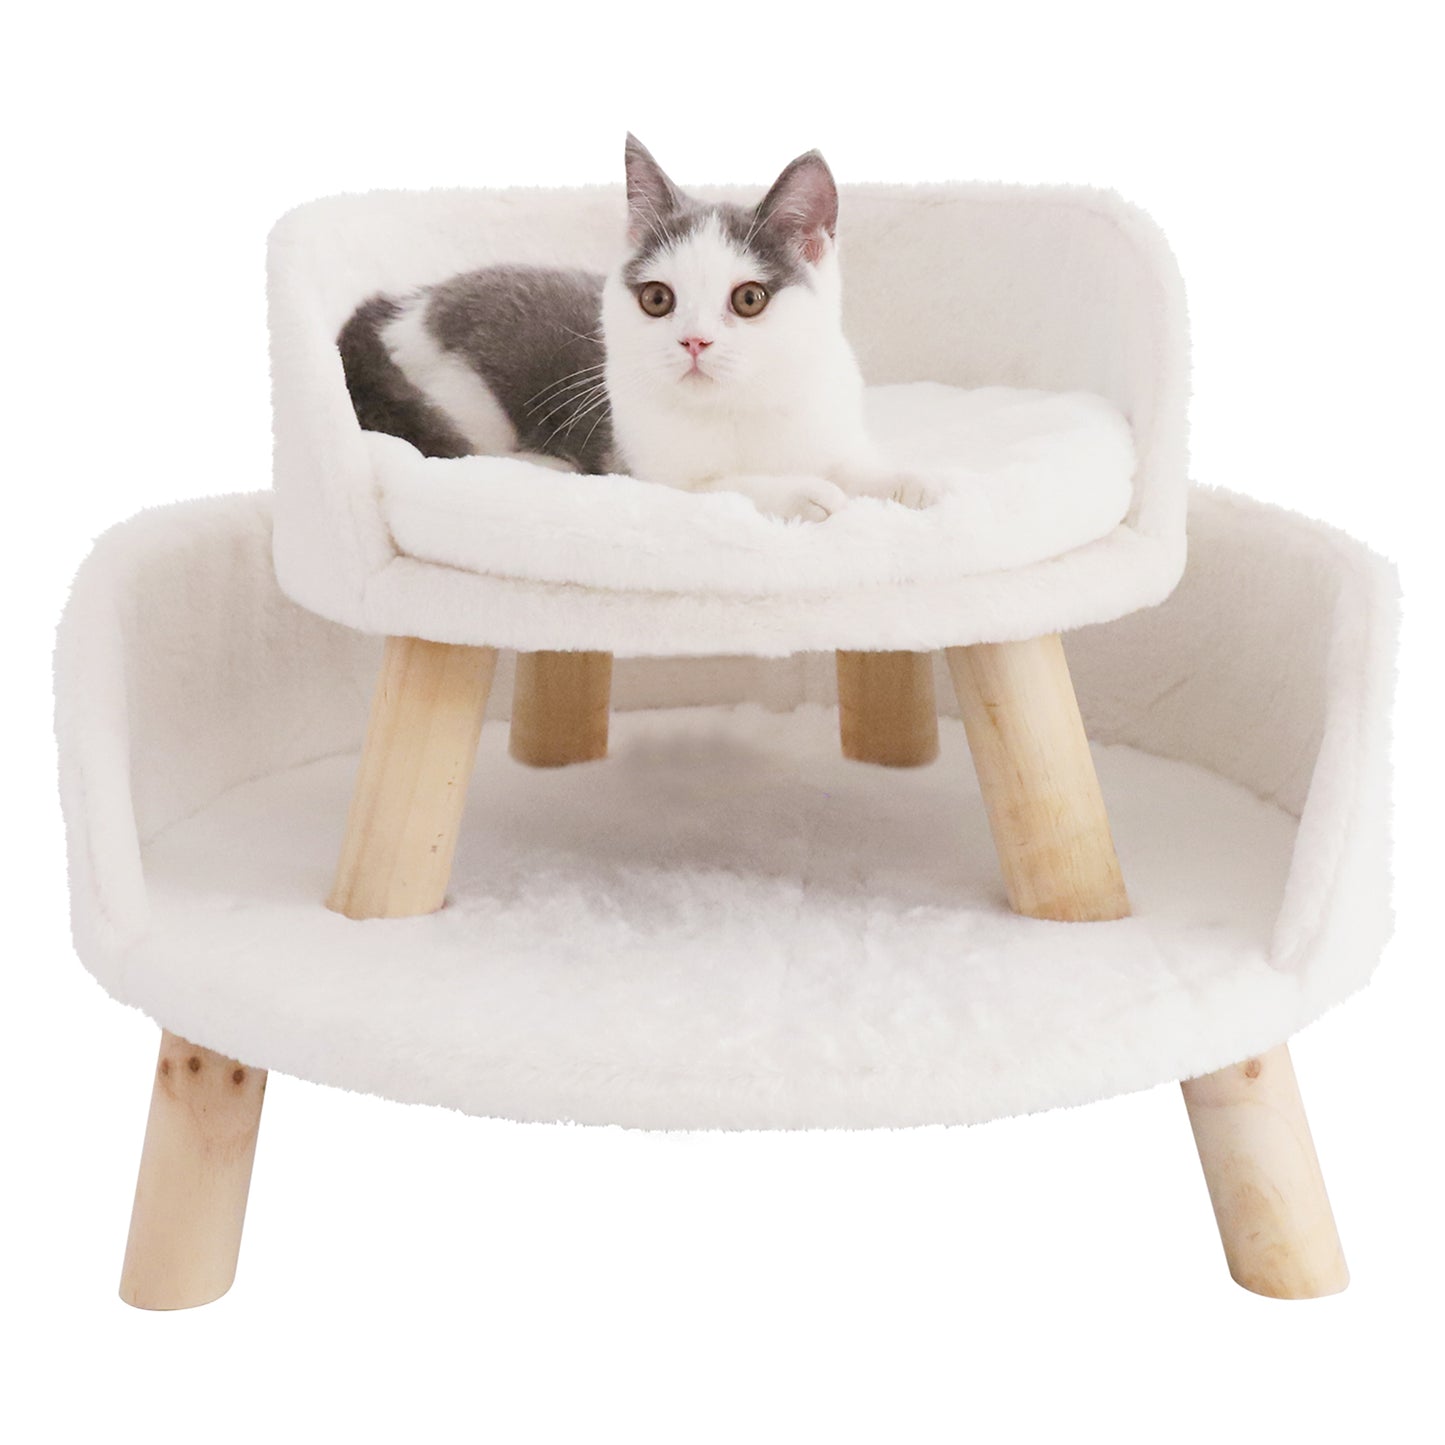 cat cushion bed cat chair bed cat stool bed pet chair bed cat cushion bed pet plush bed cat sleeping bed pet cat dog bed pet raised bed cat nesting bed